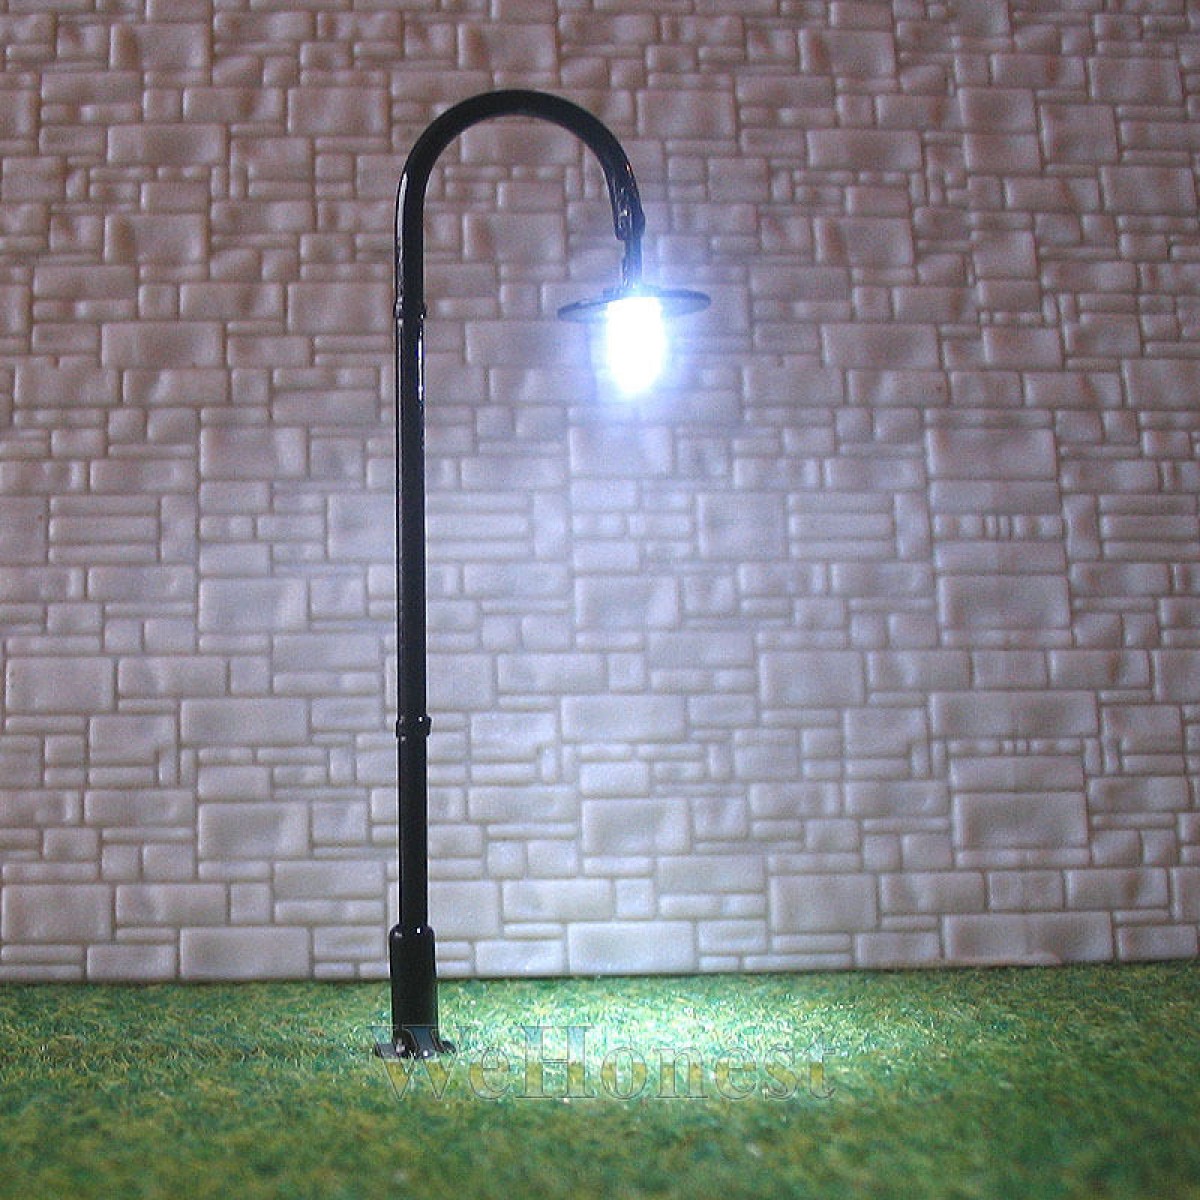 3 x HO scale Model Lamp LED Lamppost longlife cold street light not hot #L005